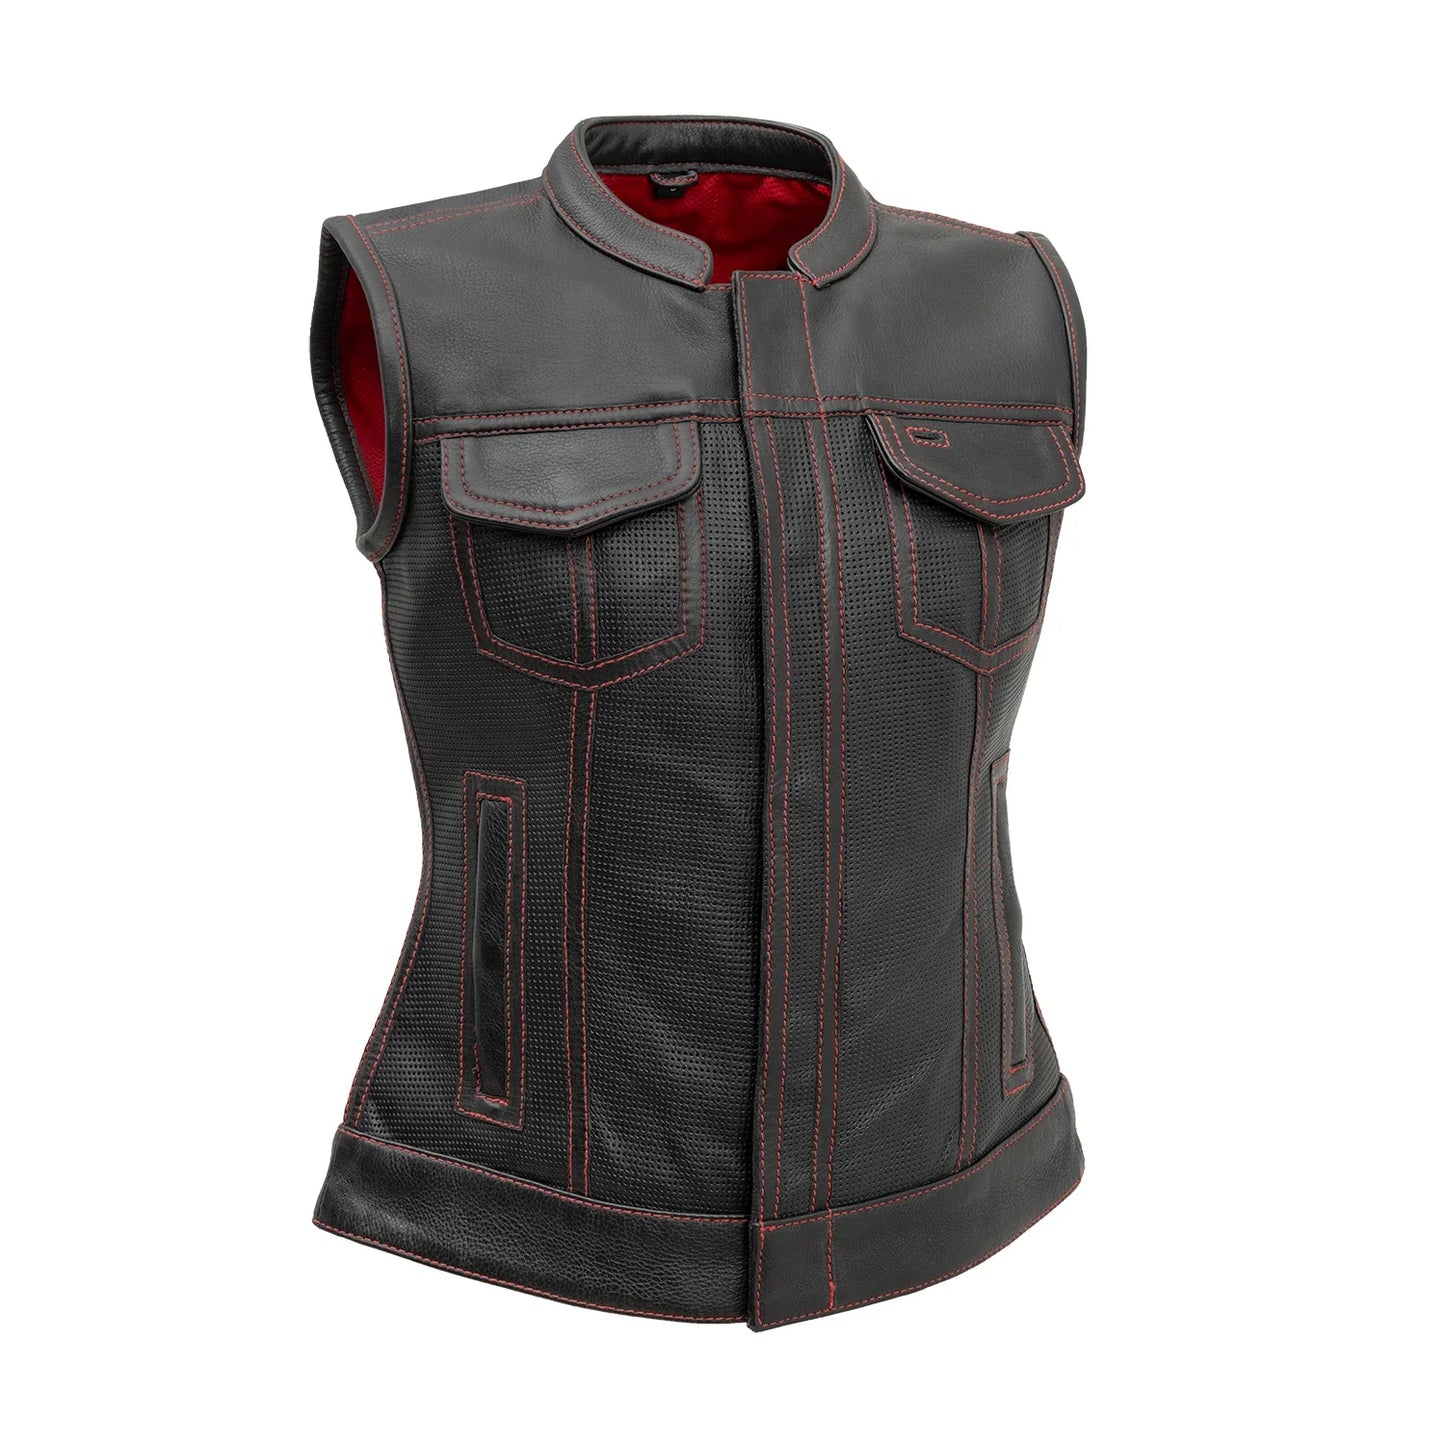 Jessica Perforated Women's Motorcycle Leather Vest Women's Vest First Manufacturing Company Black Red XS 